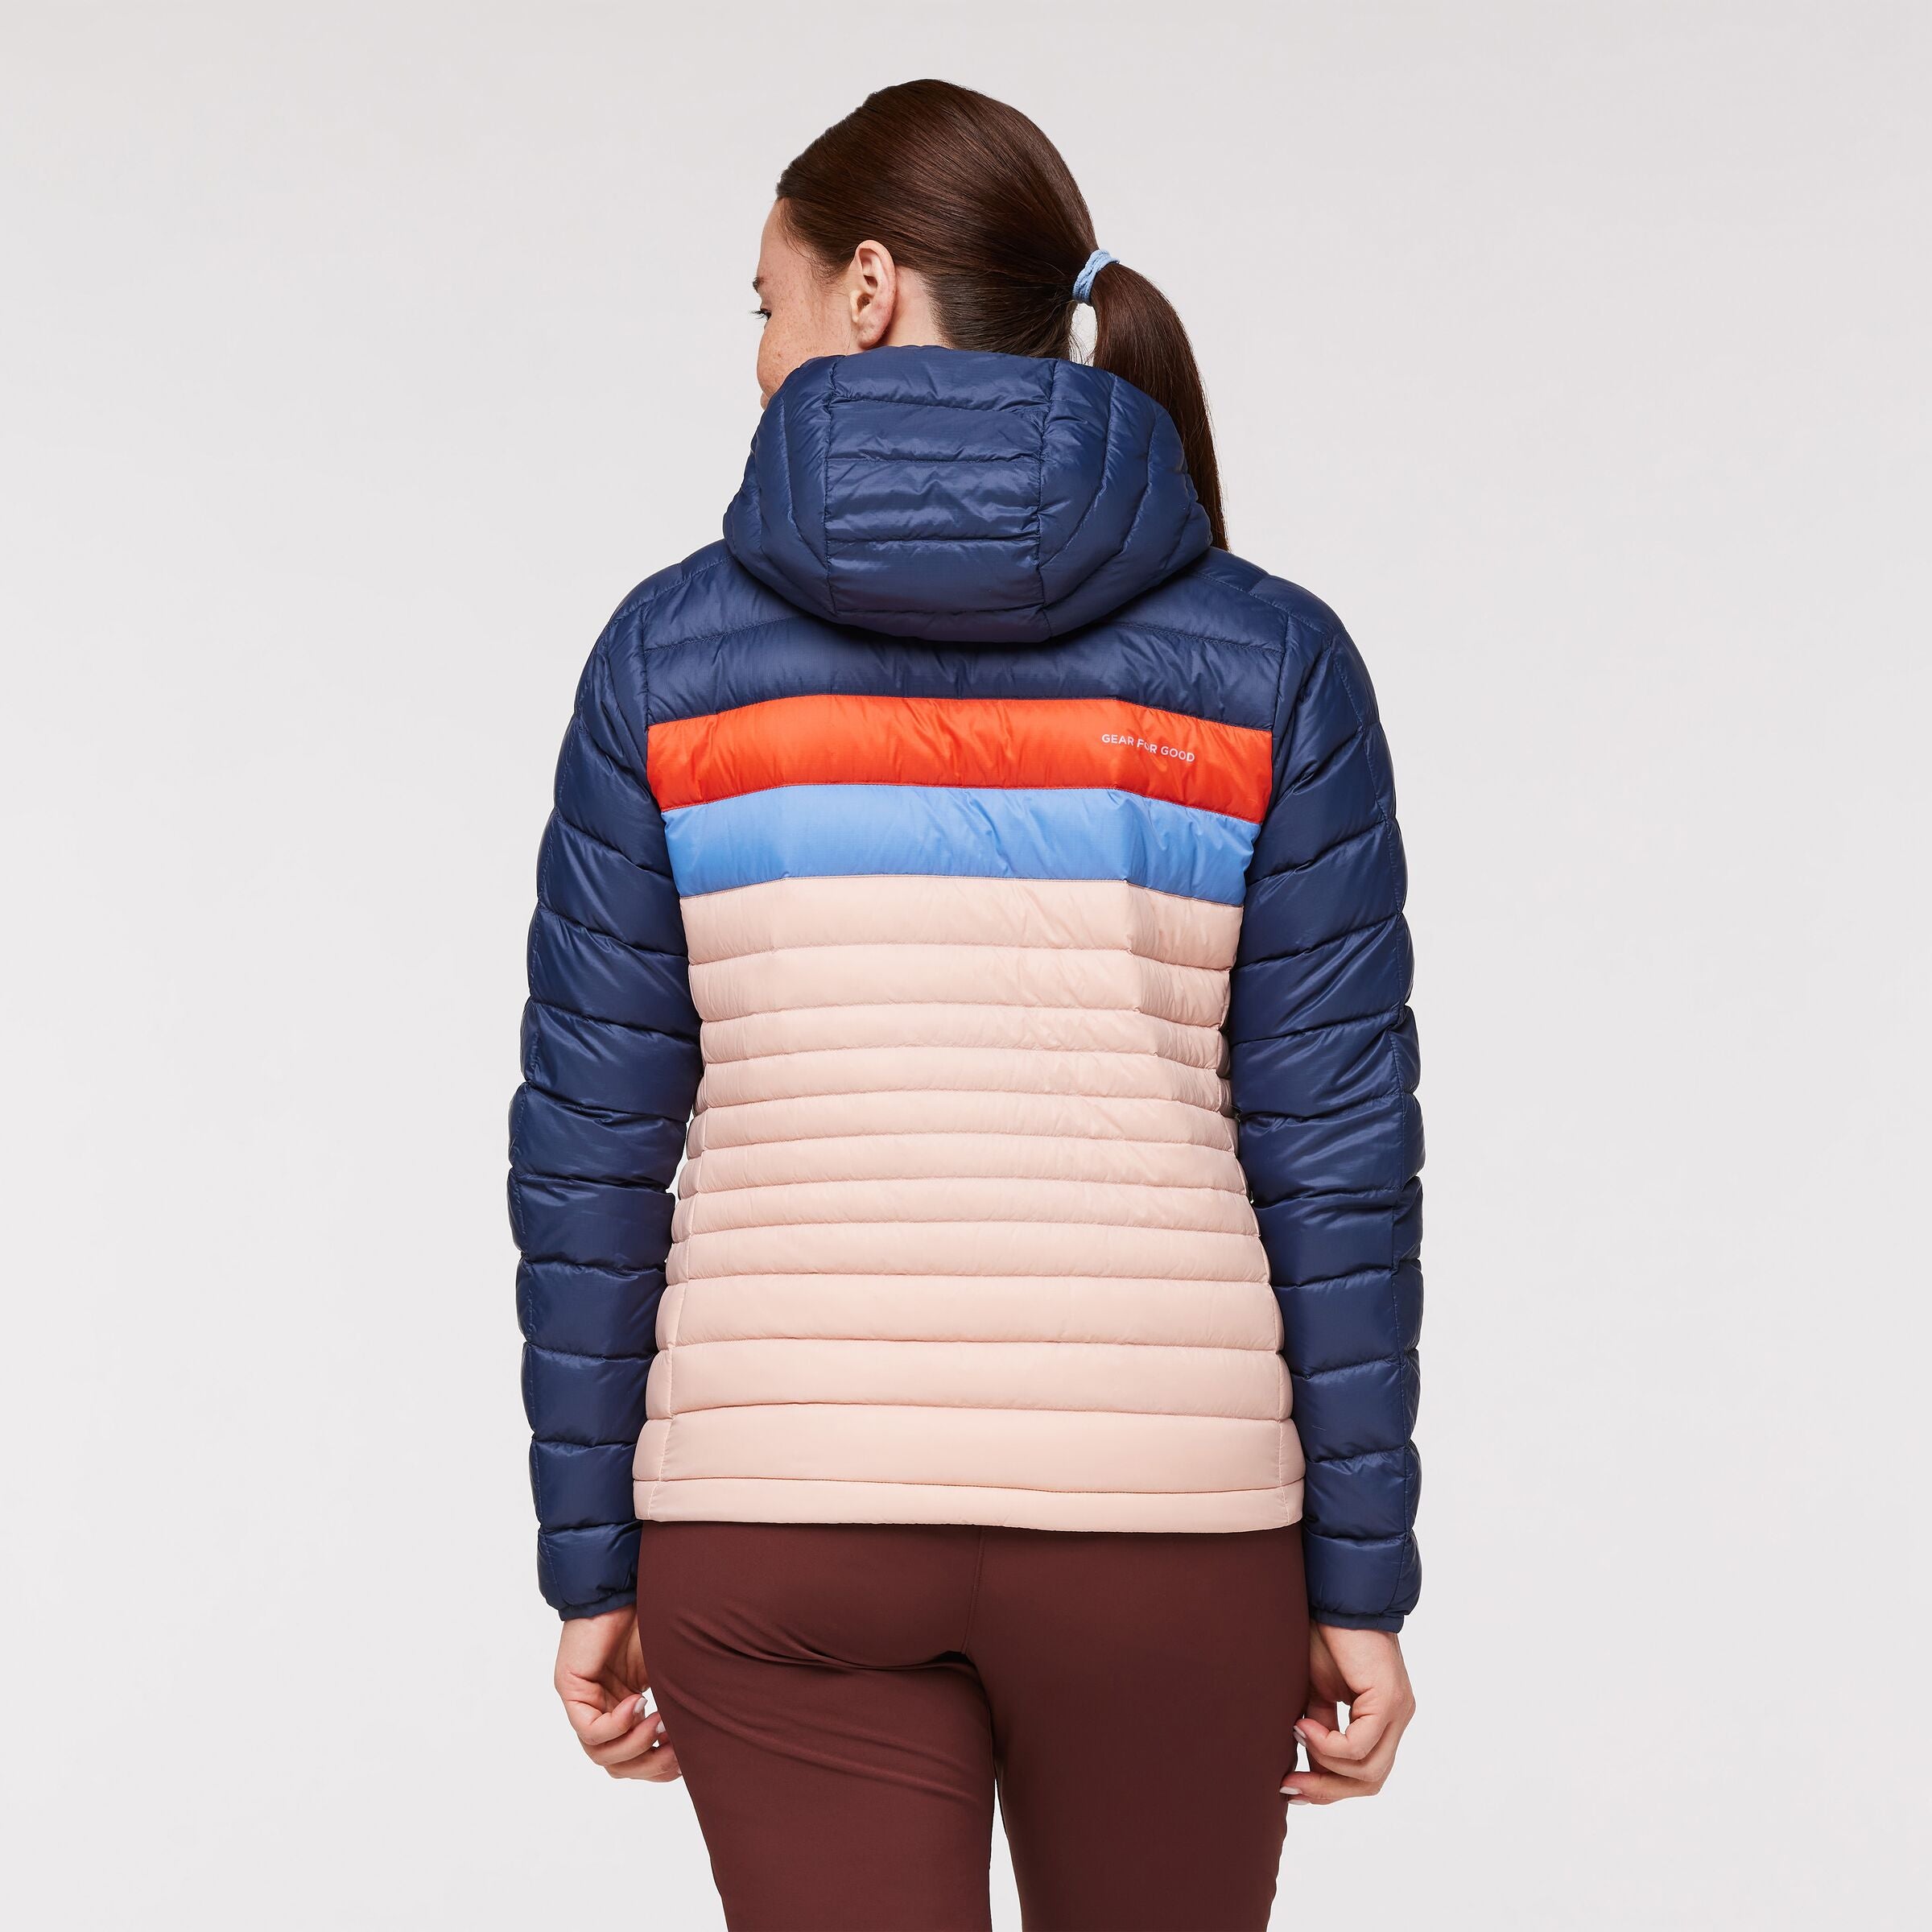 Fuego Hooded Down Jacket - Women's, Ink/Rosewood